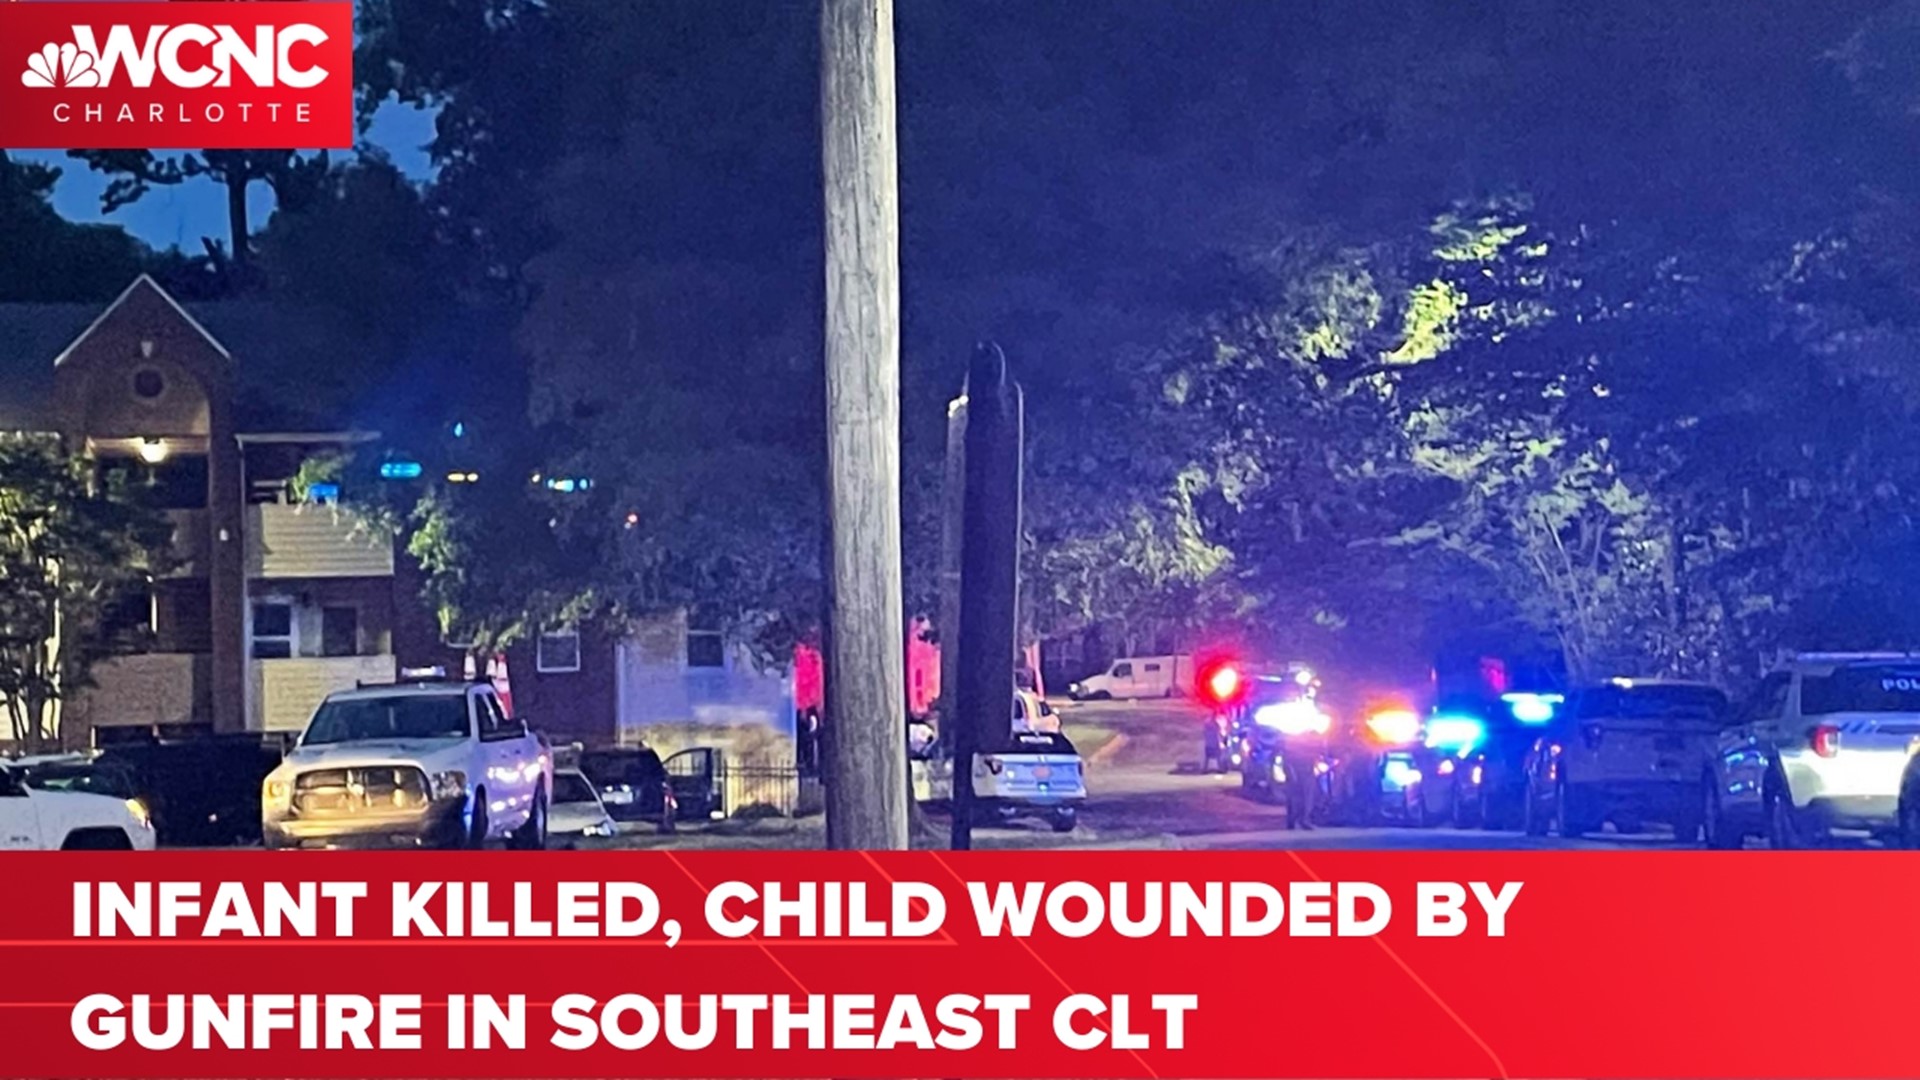 The one-year-old child died at the hospital, while the seven-year-old child faced non-life-threatening injuries.